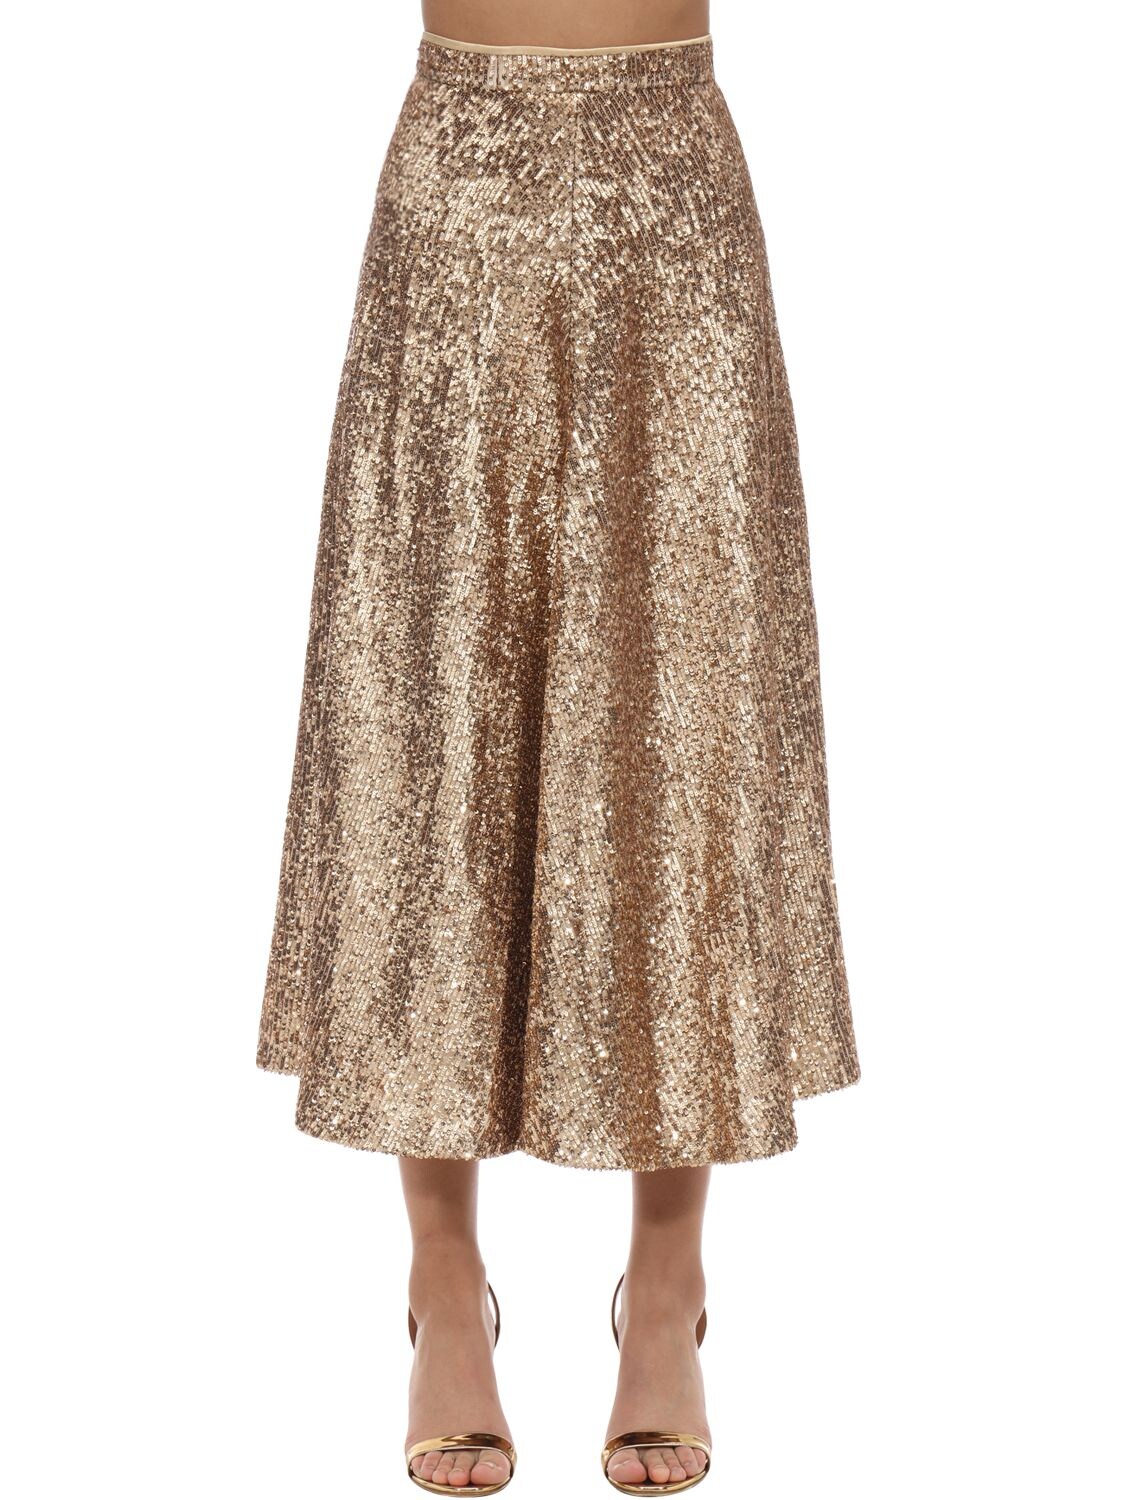 IN THE MOOD FOR LOVE HIGH WAIST SEQUINED MIDI SKIRT,71IXKL019-VE9CQUNDTW2